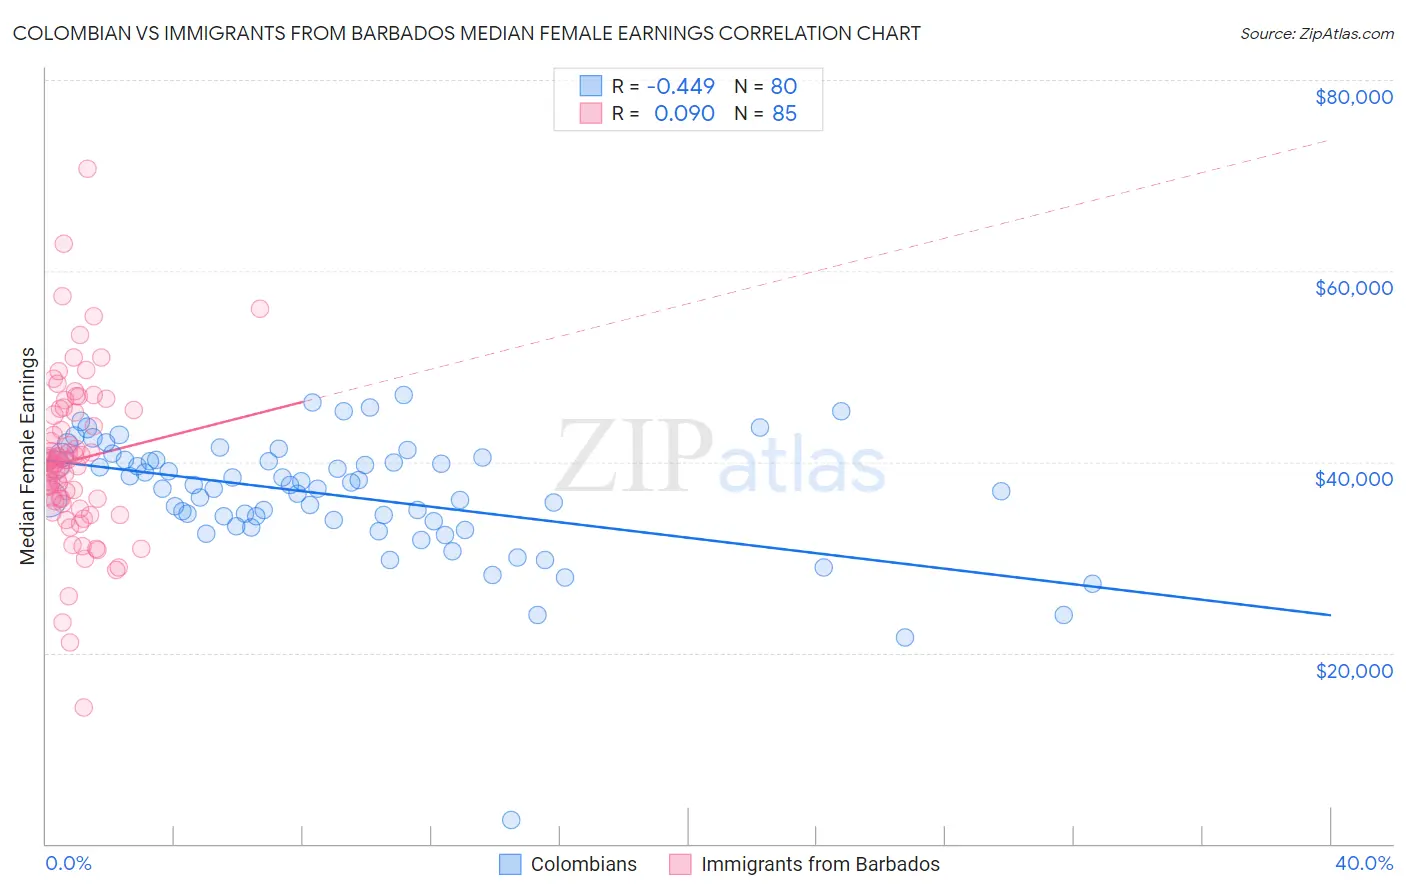 Colombian vs Immigrants from Barbados Median Female Earnings